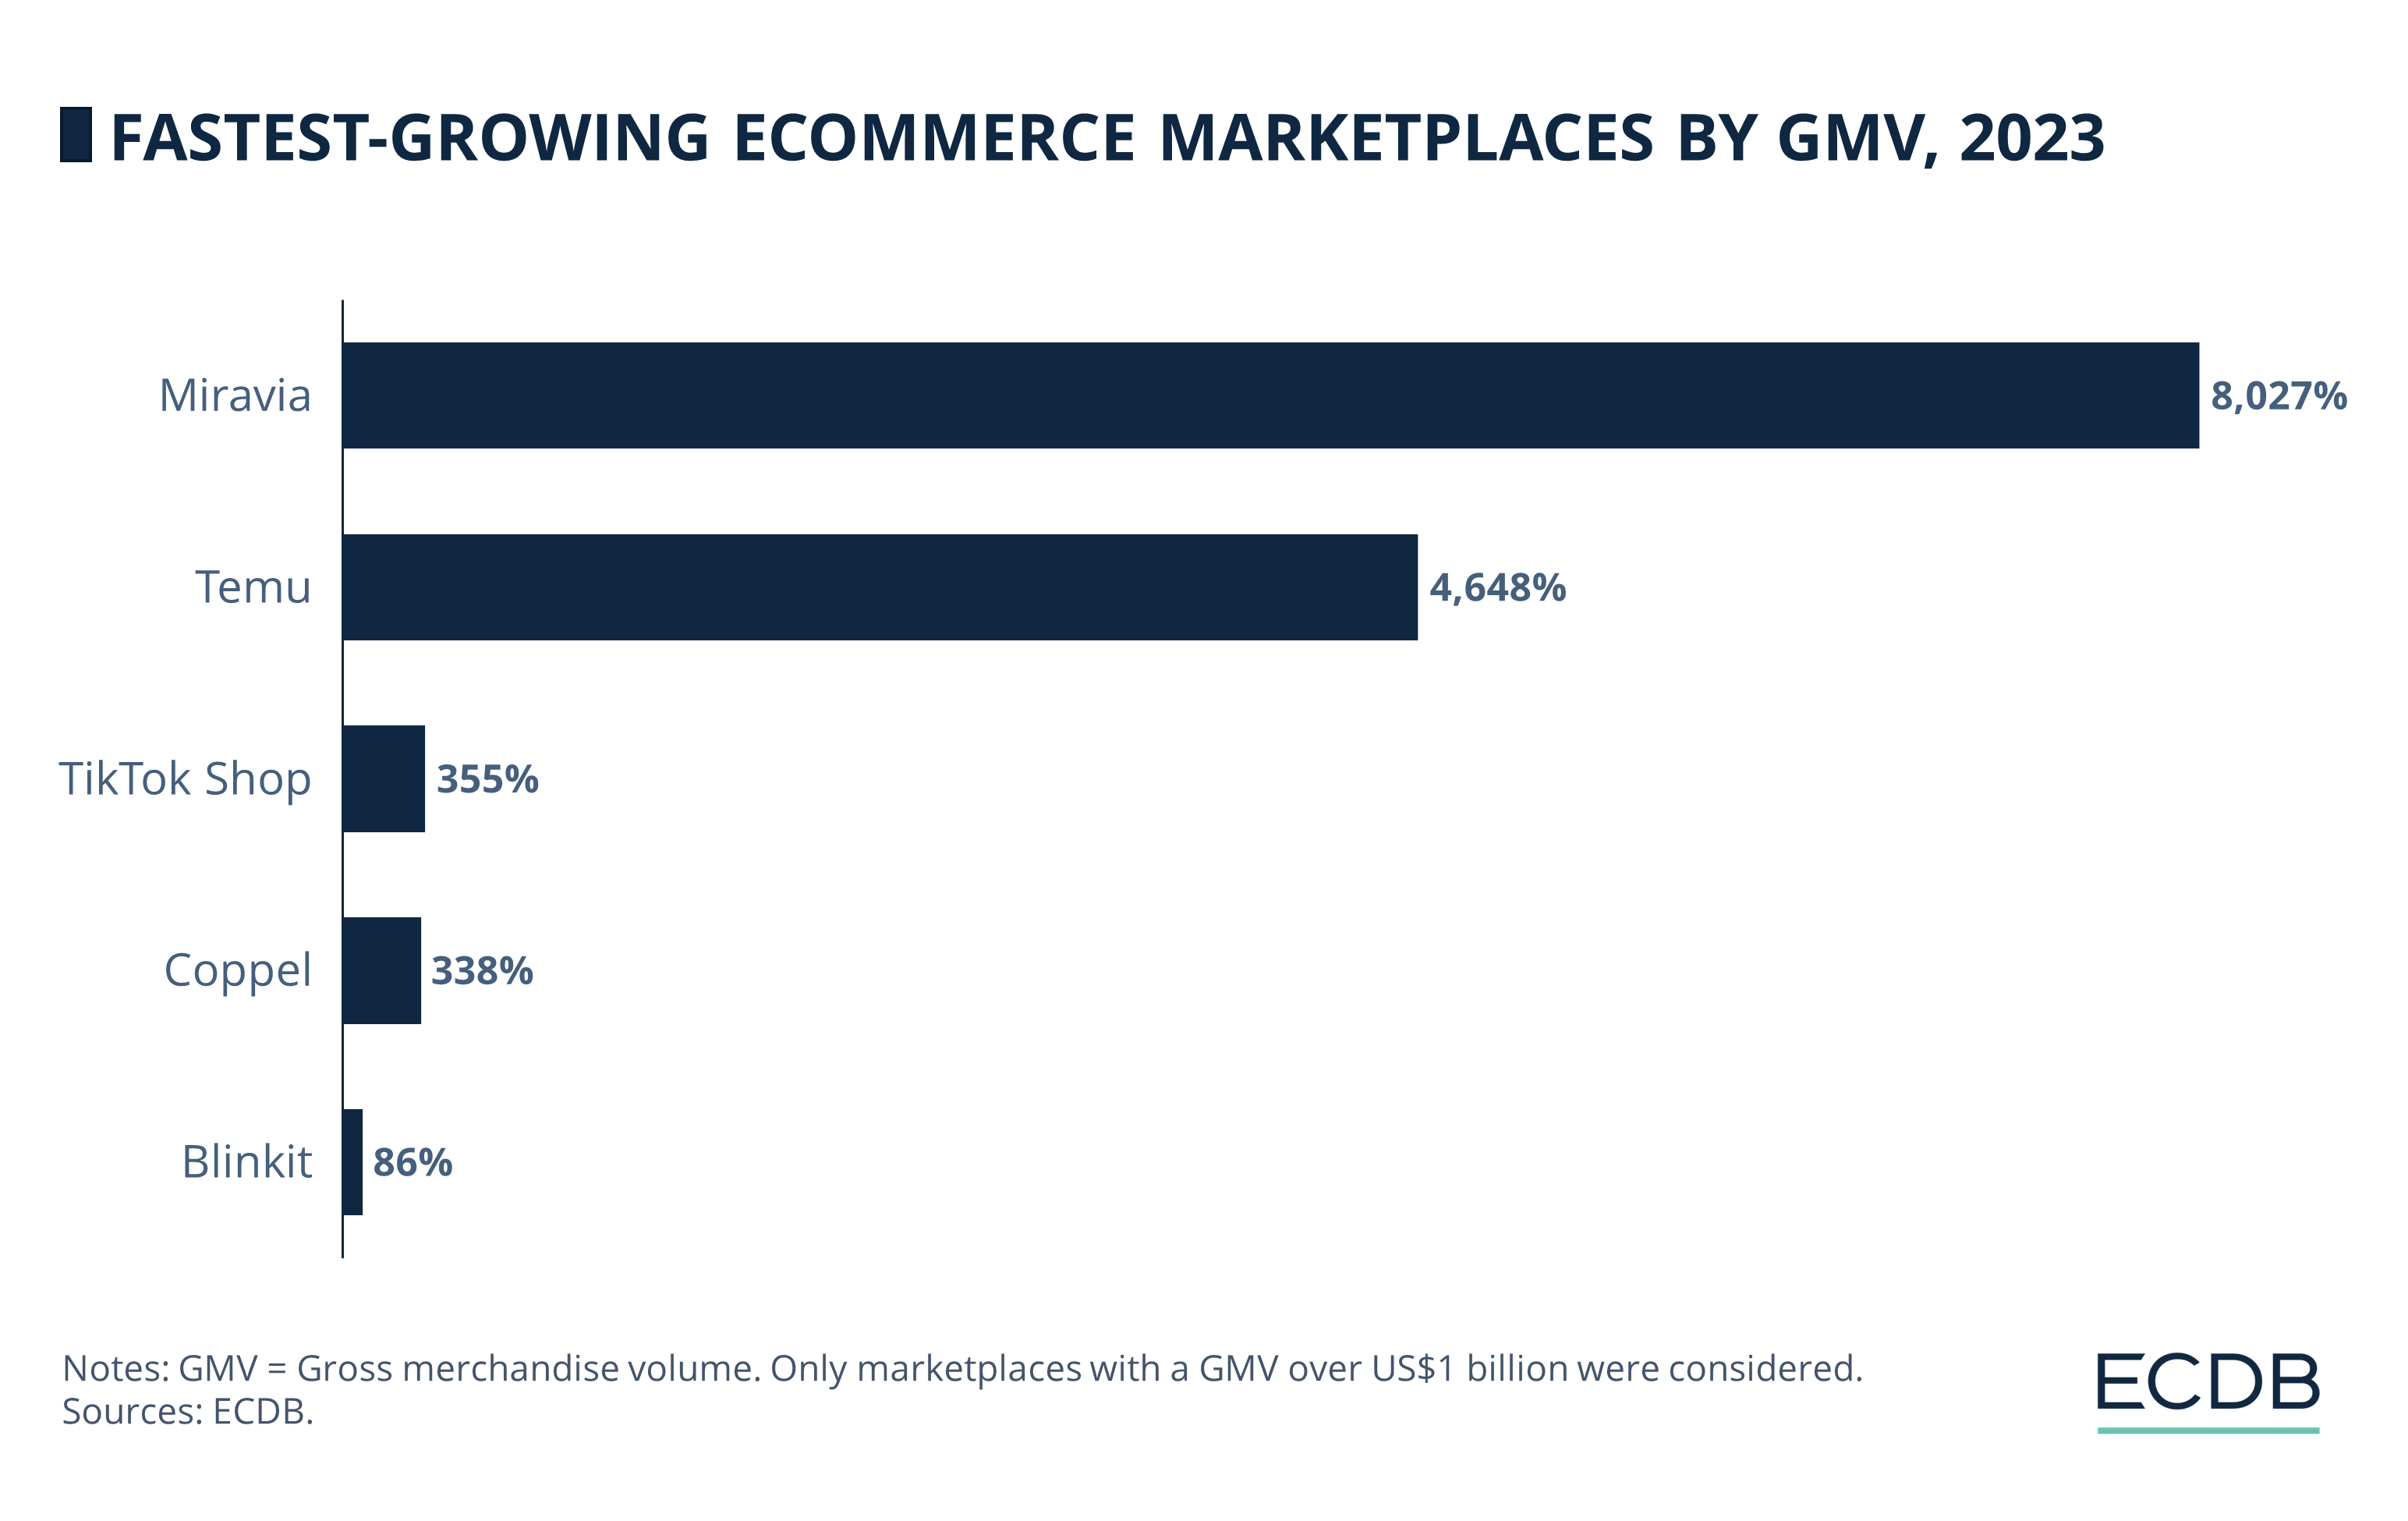 Fastest-Growing eCommerce Marketplaces by GMV, 2023